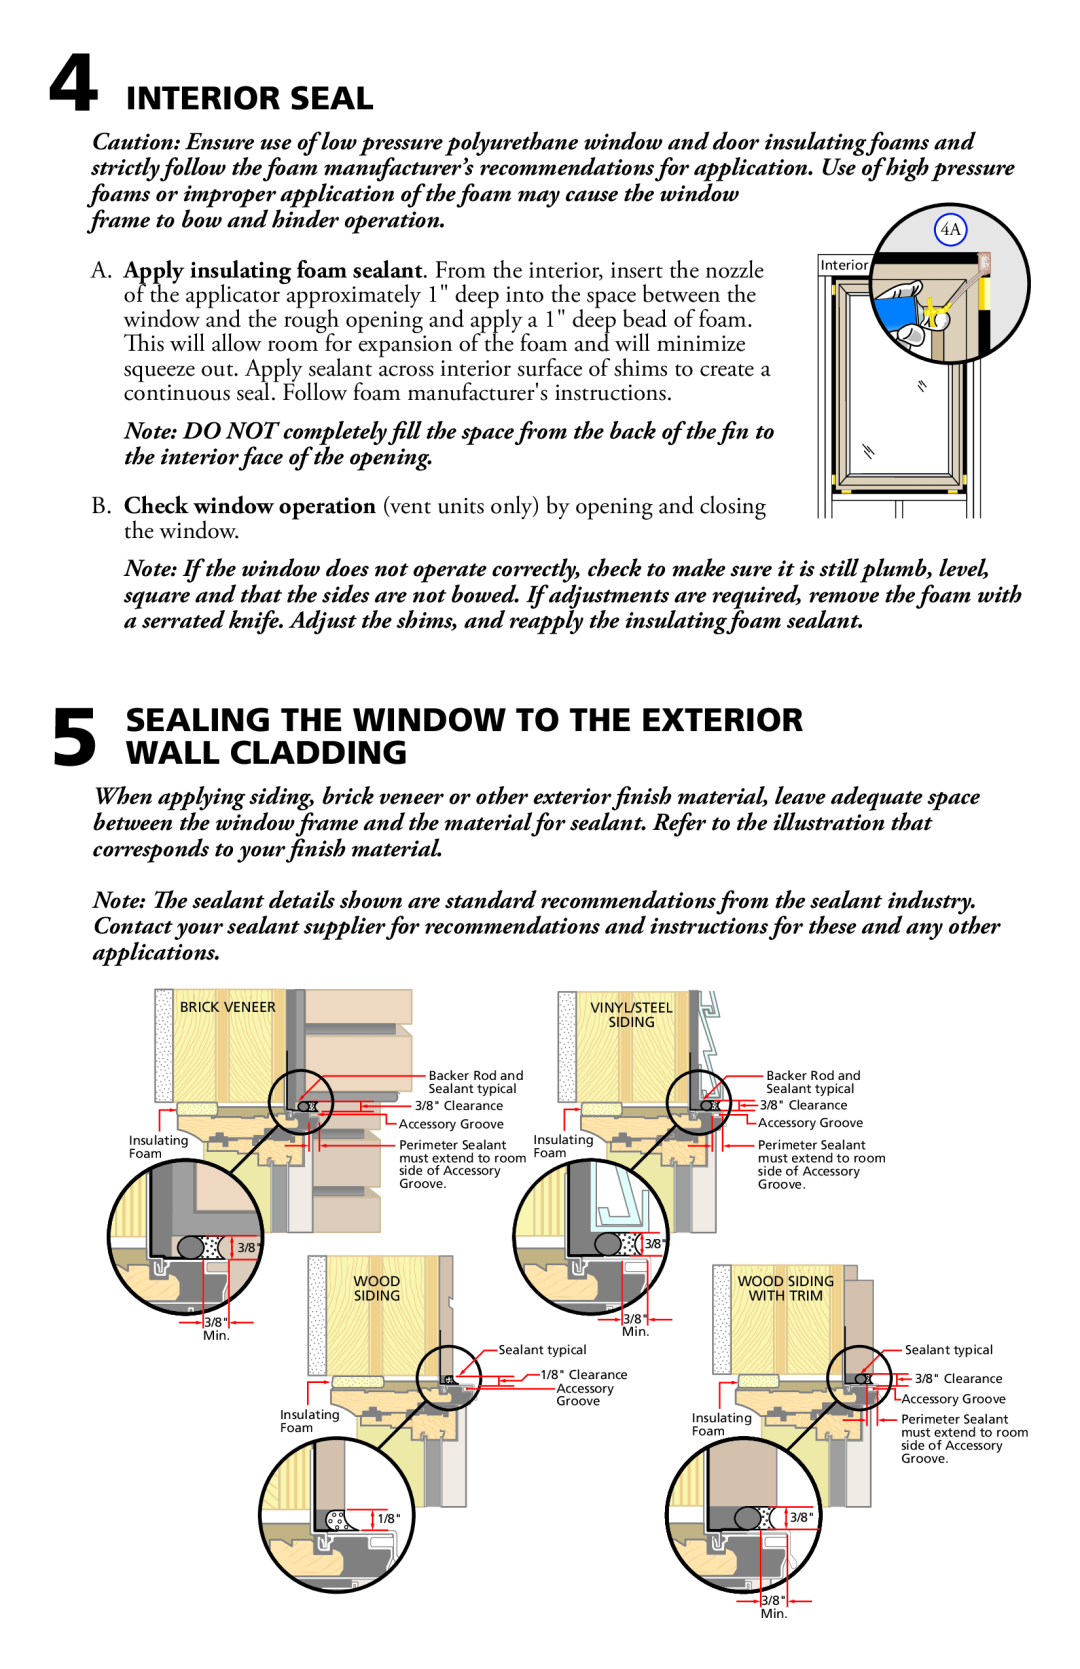 Pella 812W0100 Interior Seal, Sealing The Window To The Exterior Wall Cladding, frame to bow and hinder operation 